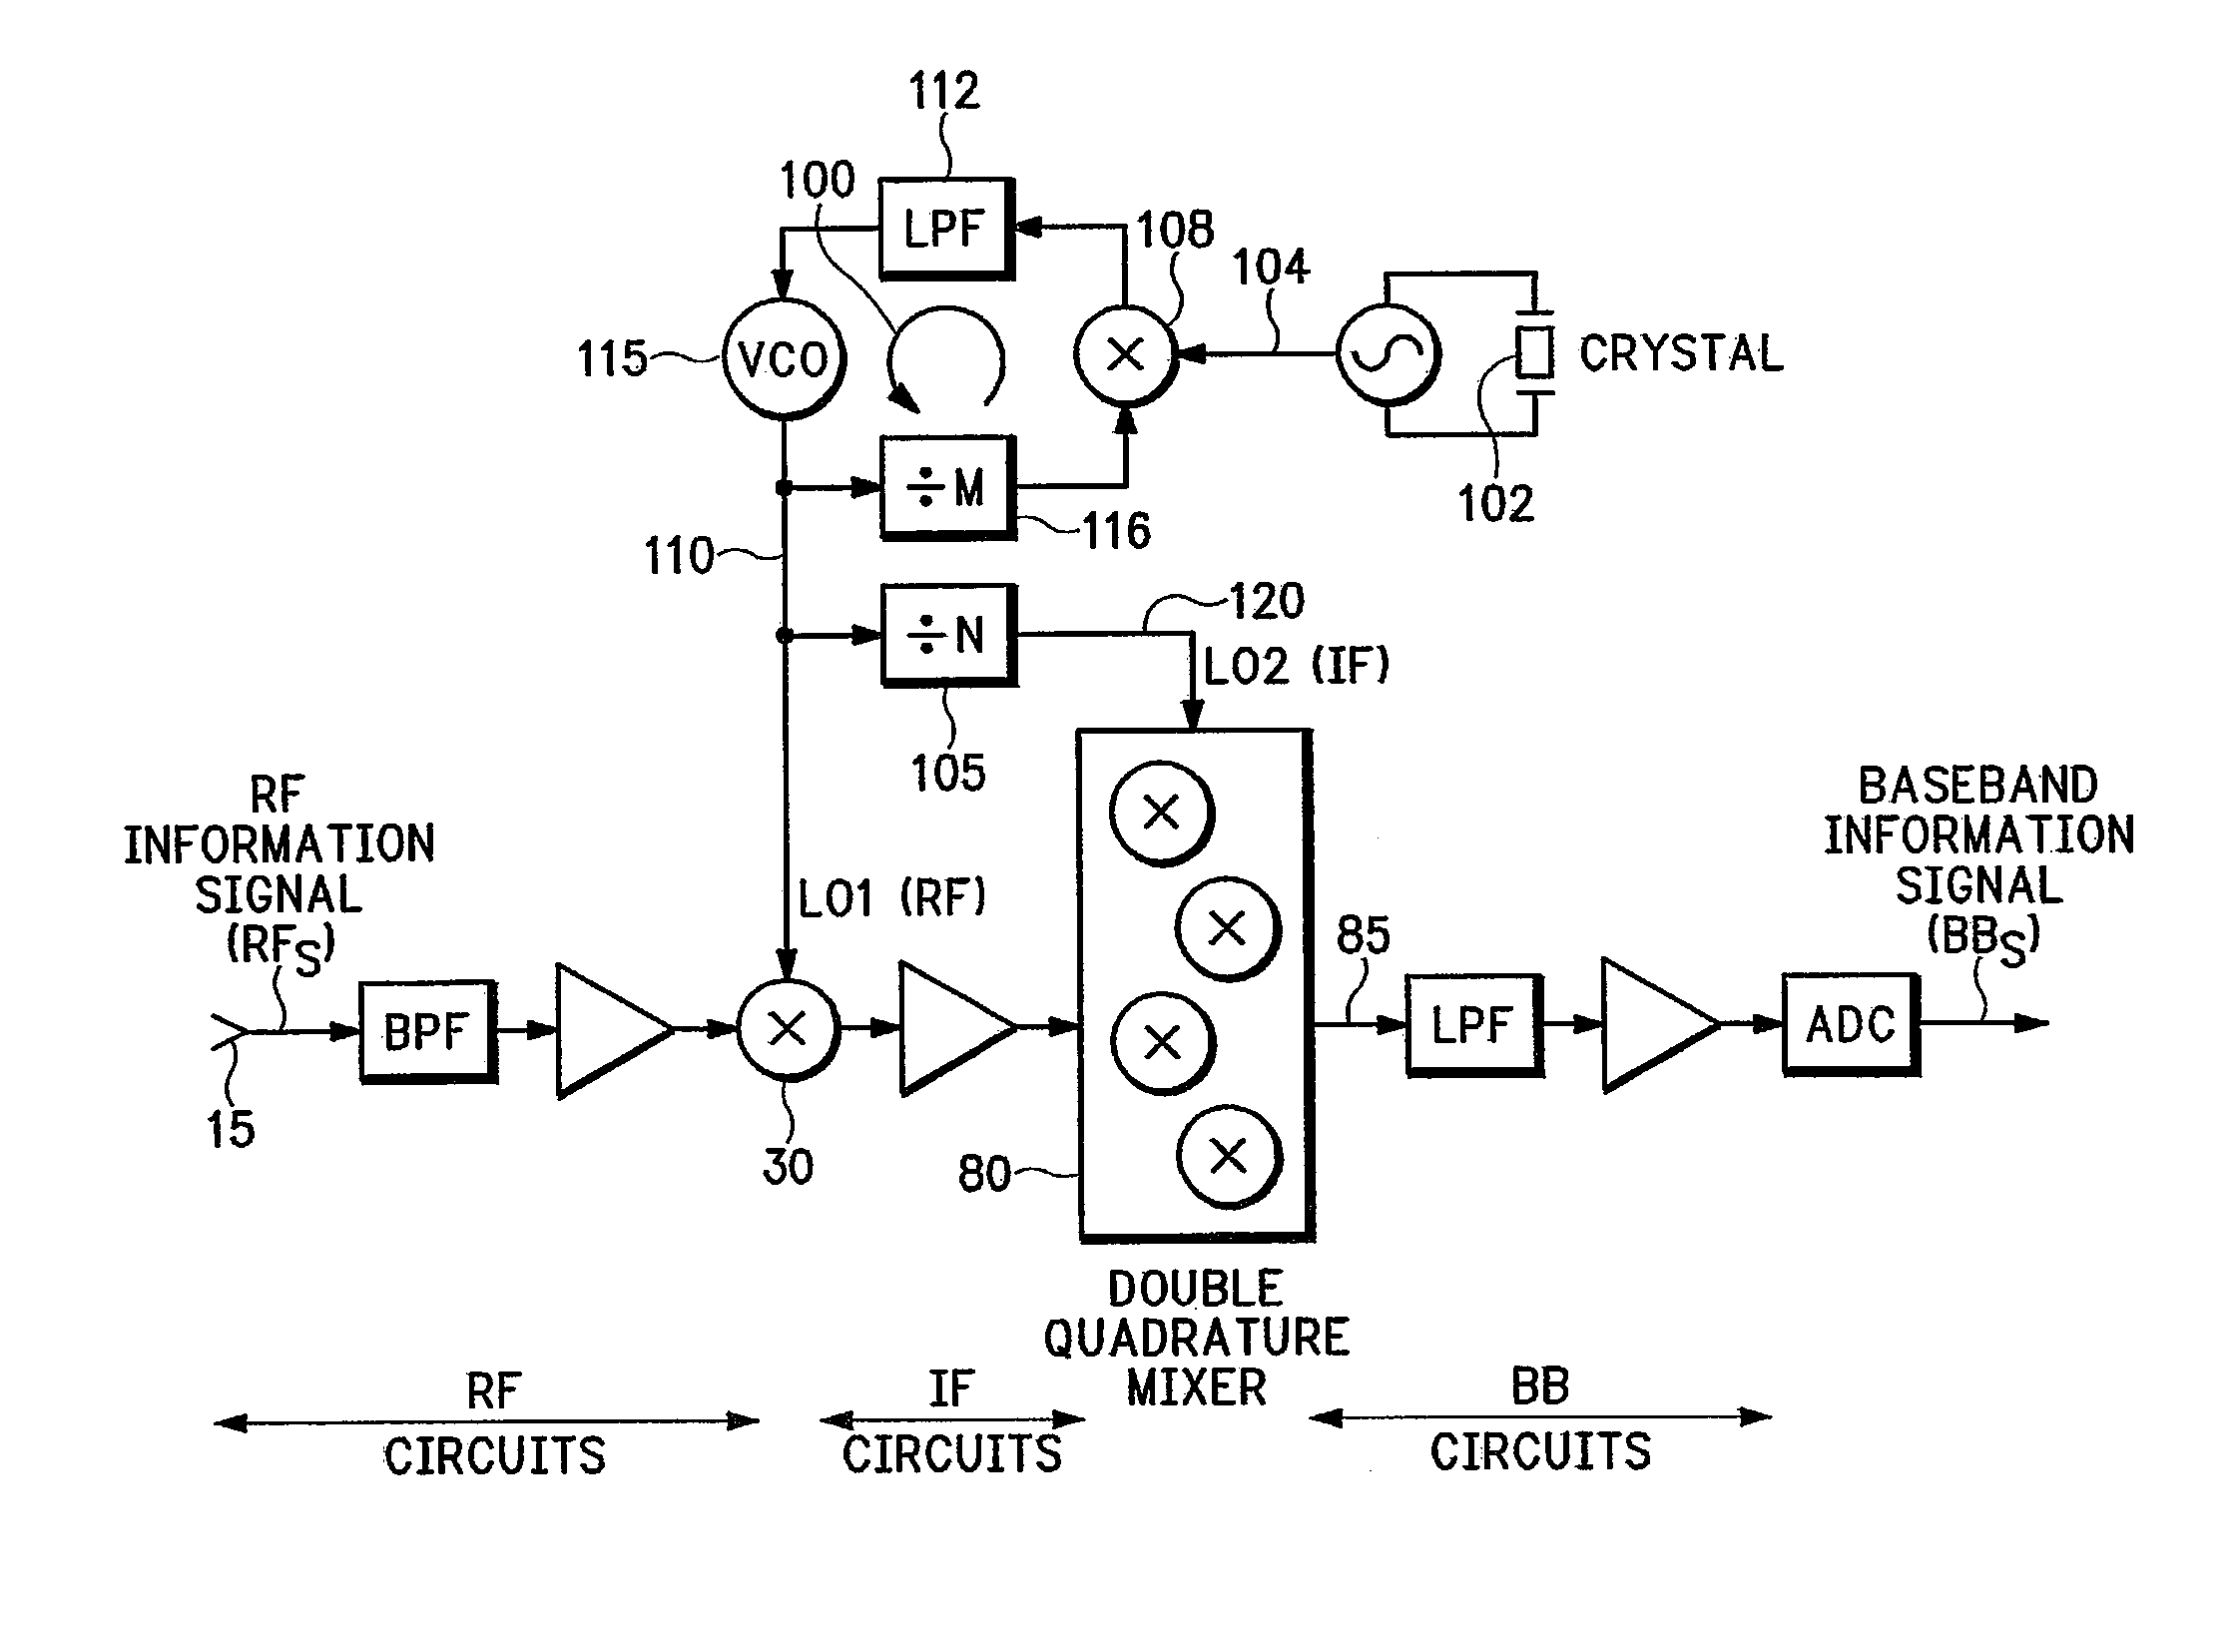 Up/down conversion circuitry for radio transceiver